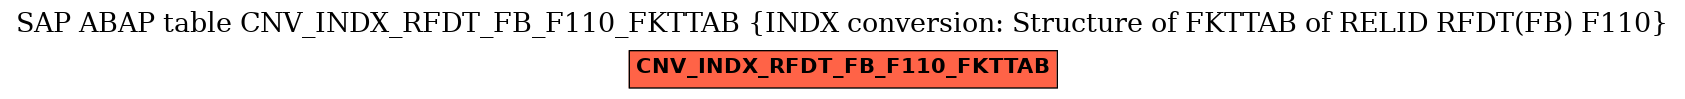 E-R Diagram for table CNV_INDX_RFDT_FB_F110_FKTTAB (INDX conversion: Structure of FKTTAB of RELID RFDT(FB) F110)